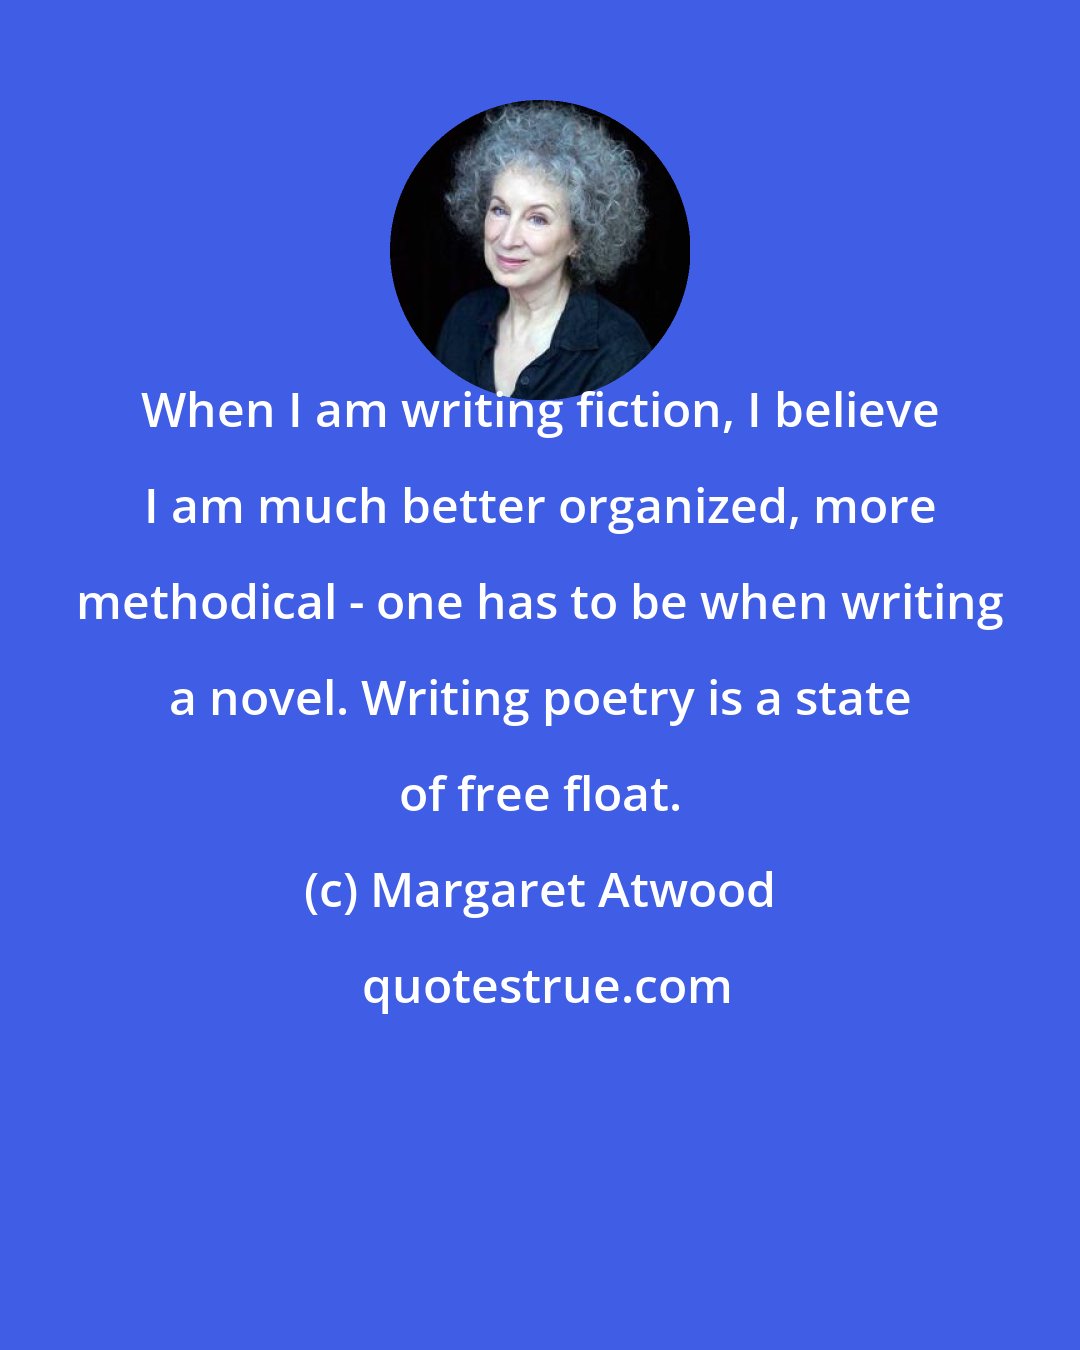 Margaret Atwood: When I am writing fiction, I believe I am much better organized, more methodical - one has to be when writing a novel. Writing poetry is a state of free float.